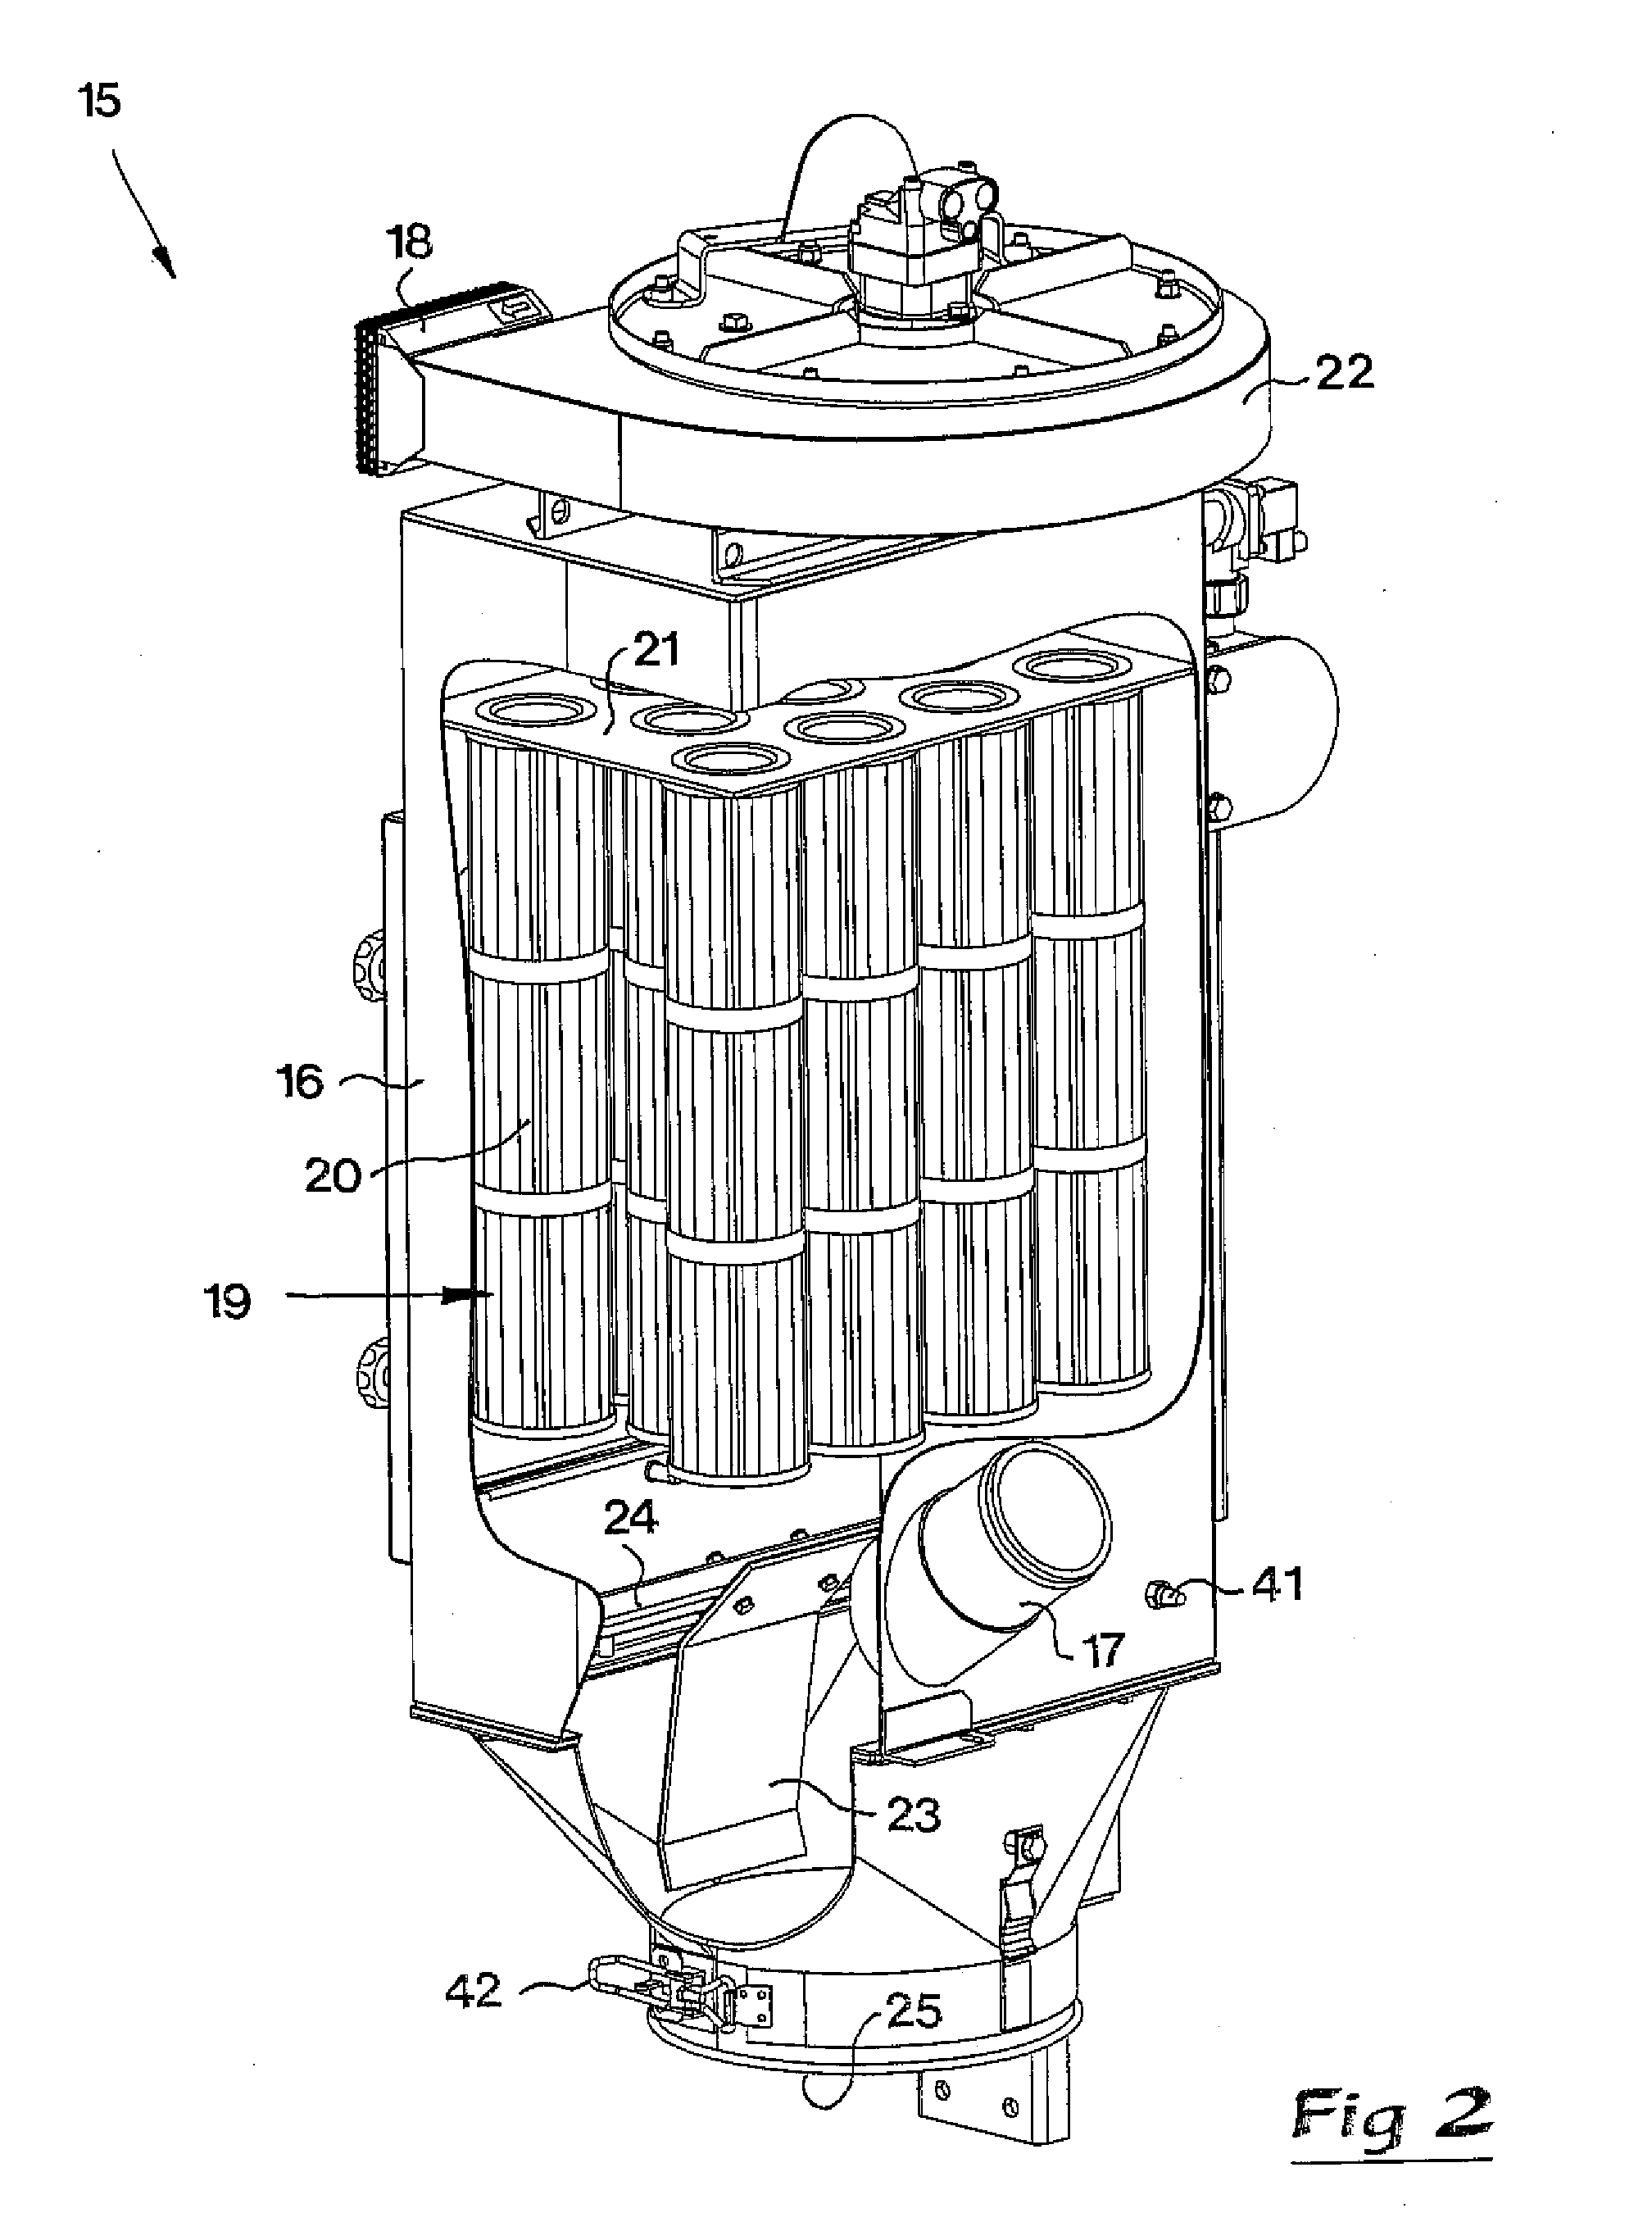 Particle Separator for Separating Drill Cuttings From an Air Flow and a Drill Rig as Well as a Method for Controlling a Particle Separator